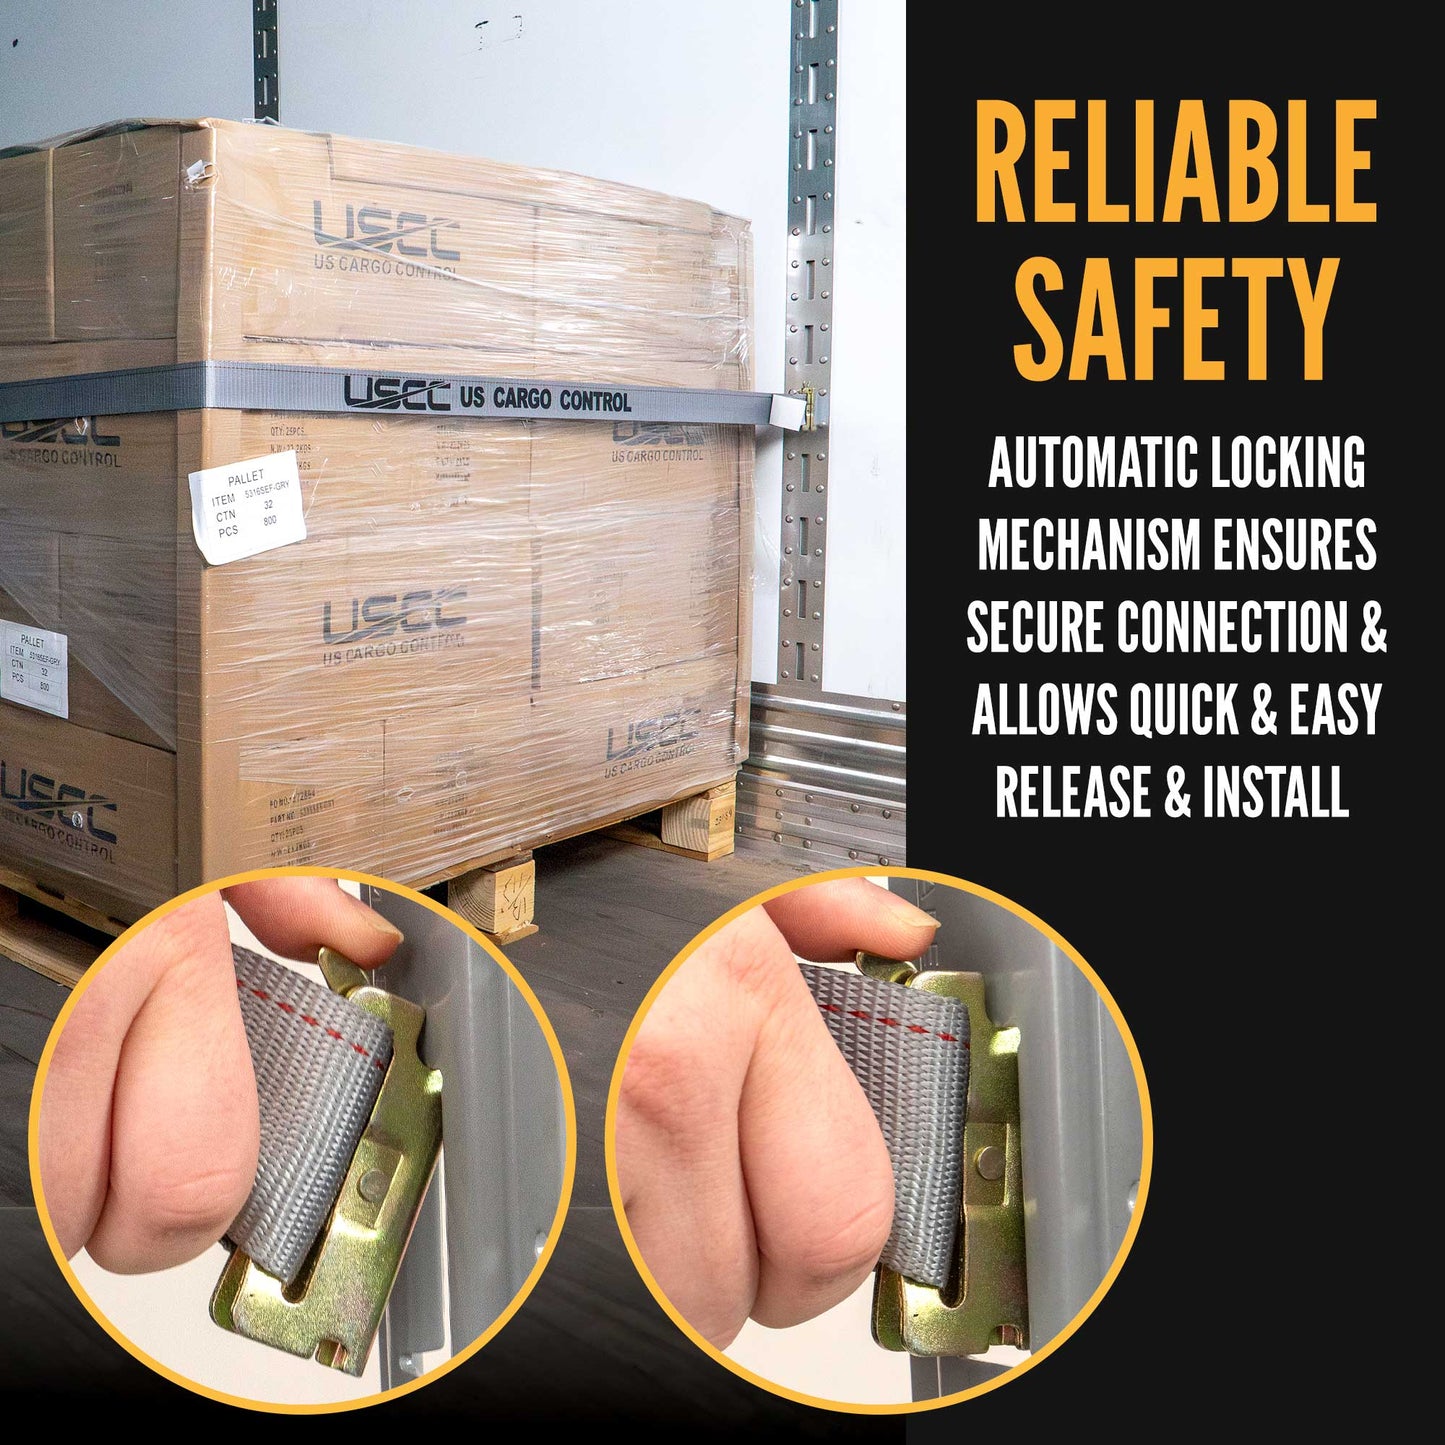  e track fittings ensure a secure connection